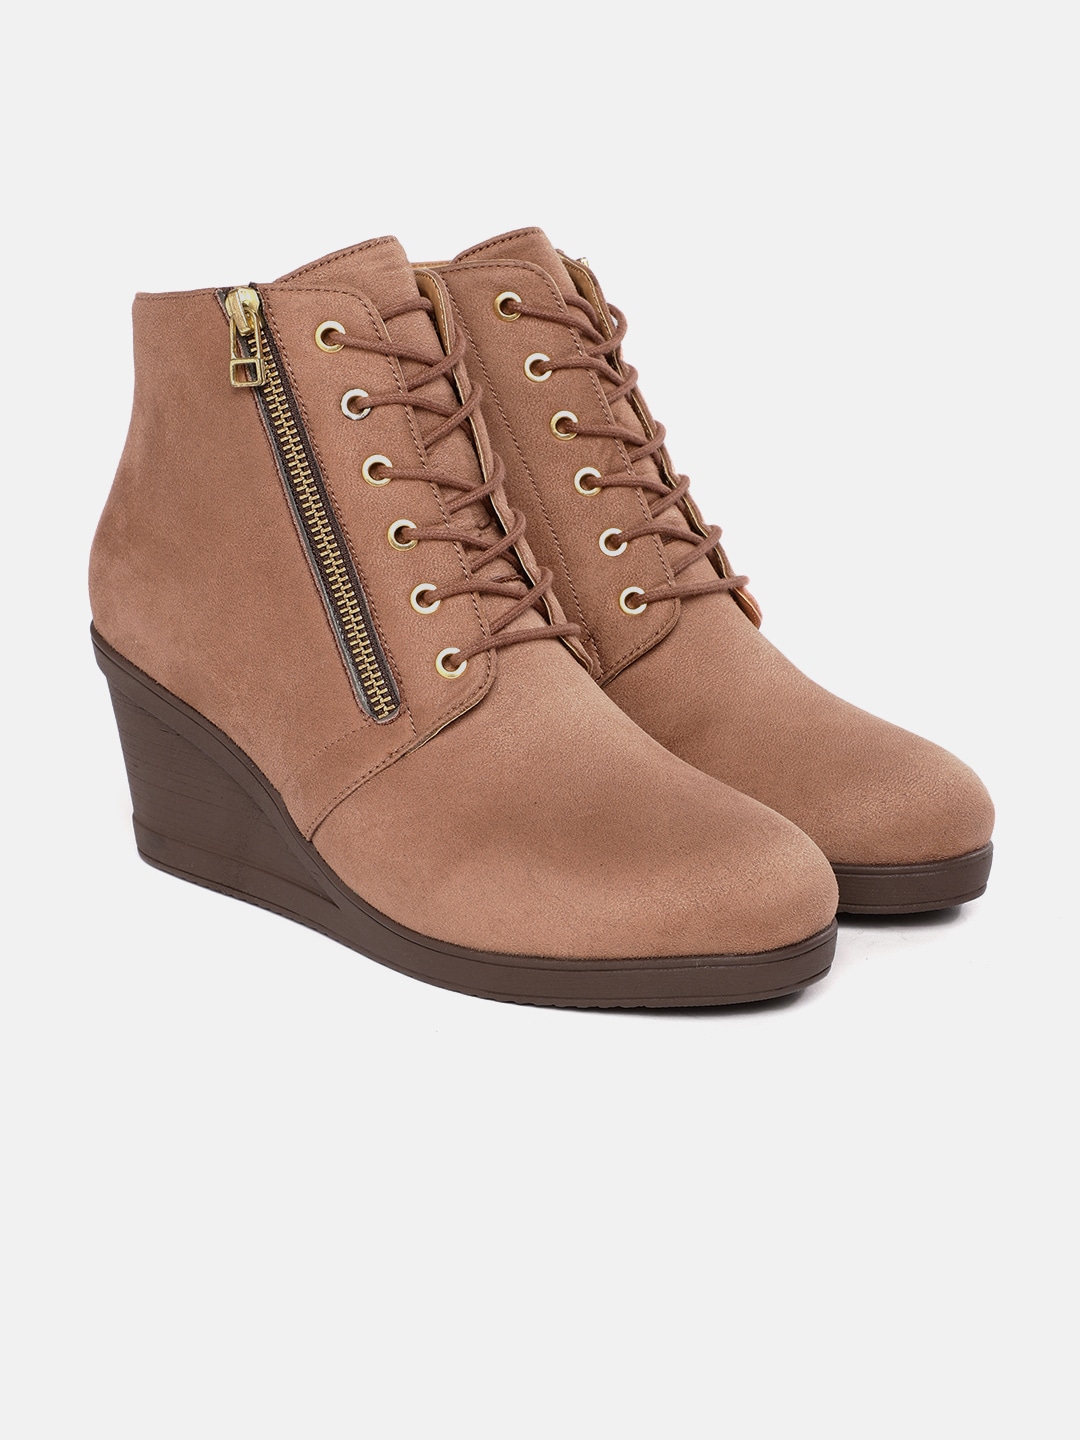 DressBerry Women Nude-Coloured Suede Finish Mid-Top Heeled Boots Price in India